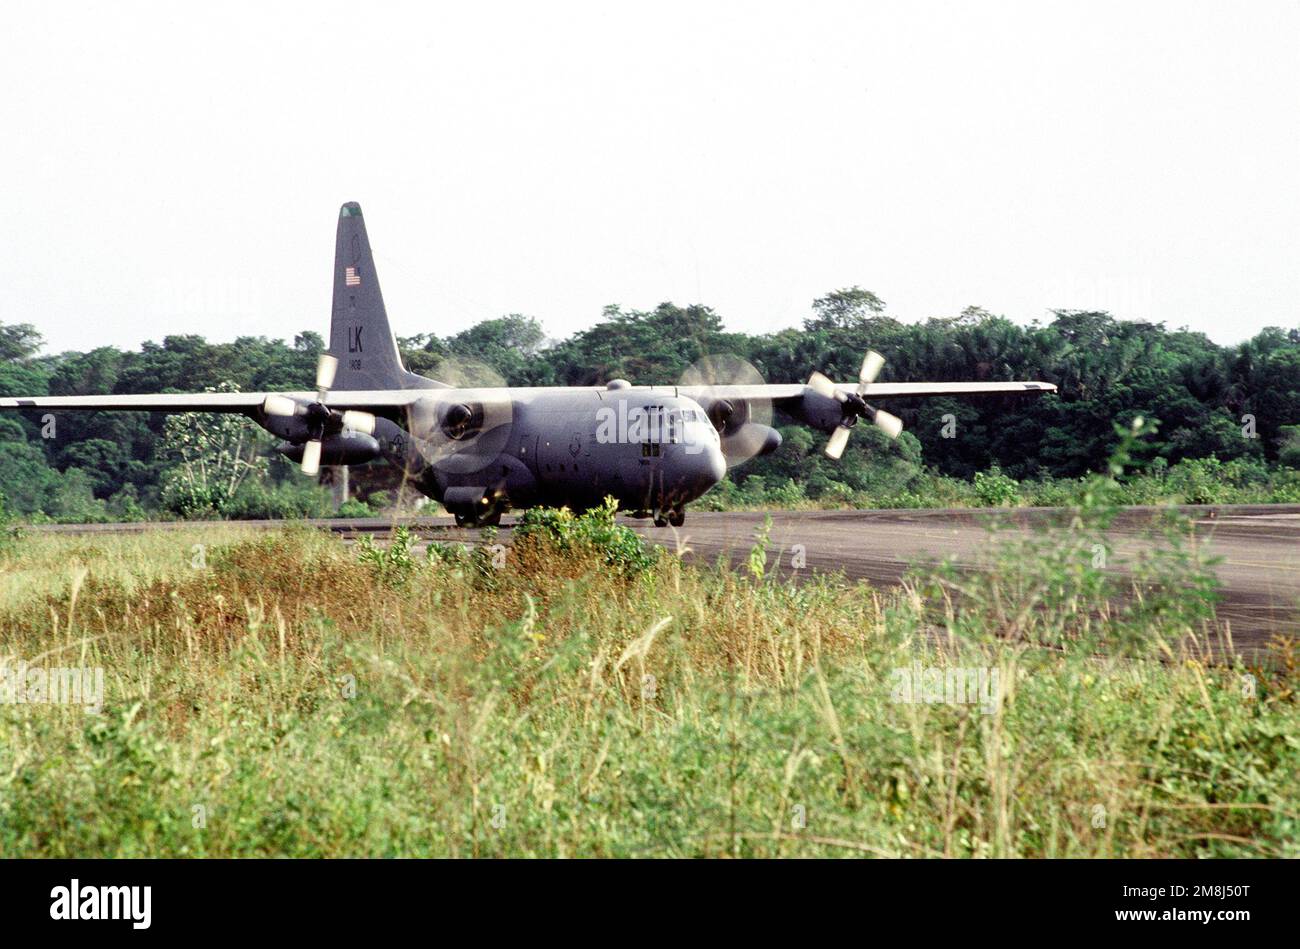 A C-130 Hercules of the 61st Airlift Squadron, Little Rock Air Force Base, Ark., taxis on the flightline of the Johan Adolf Penger Airport carrying supplies and personnel.(Exact date unknown). Subject Operation/Series: DISTANT HAVEN Country: Suriname (SUR) Stock Photo